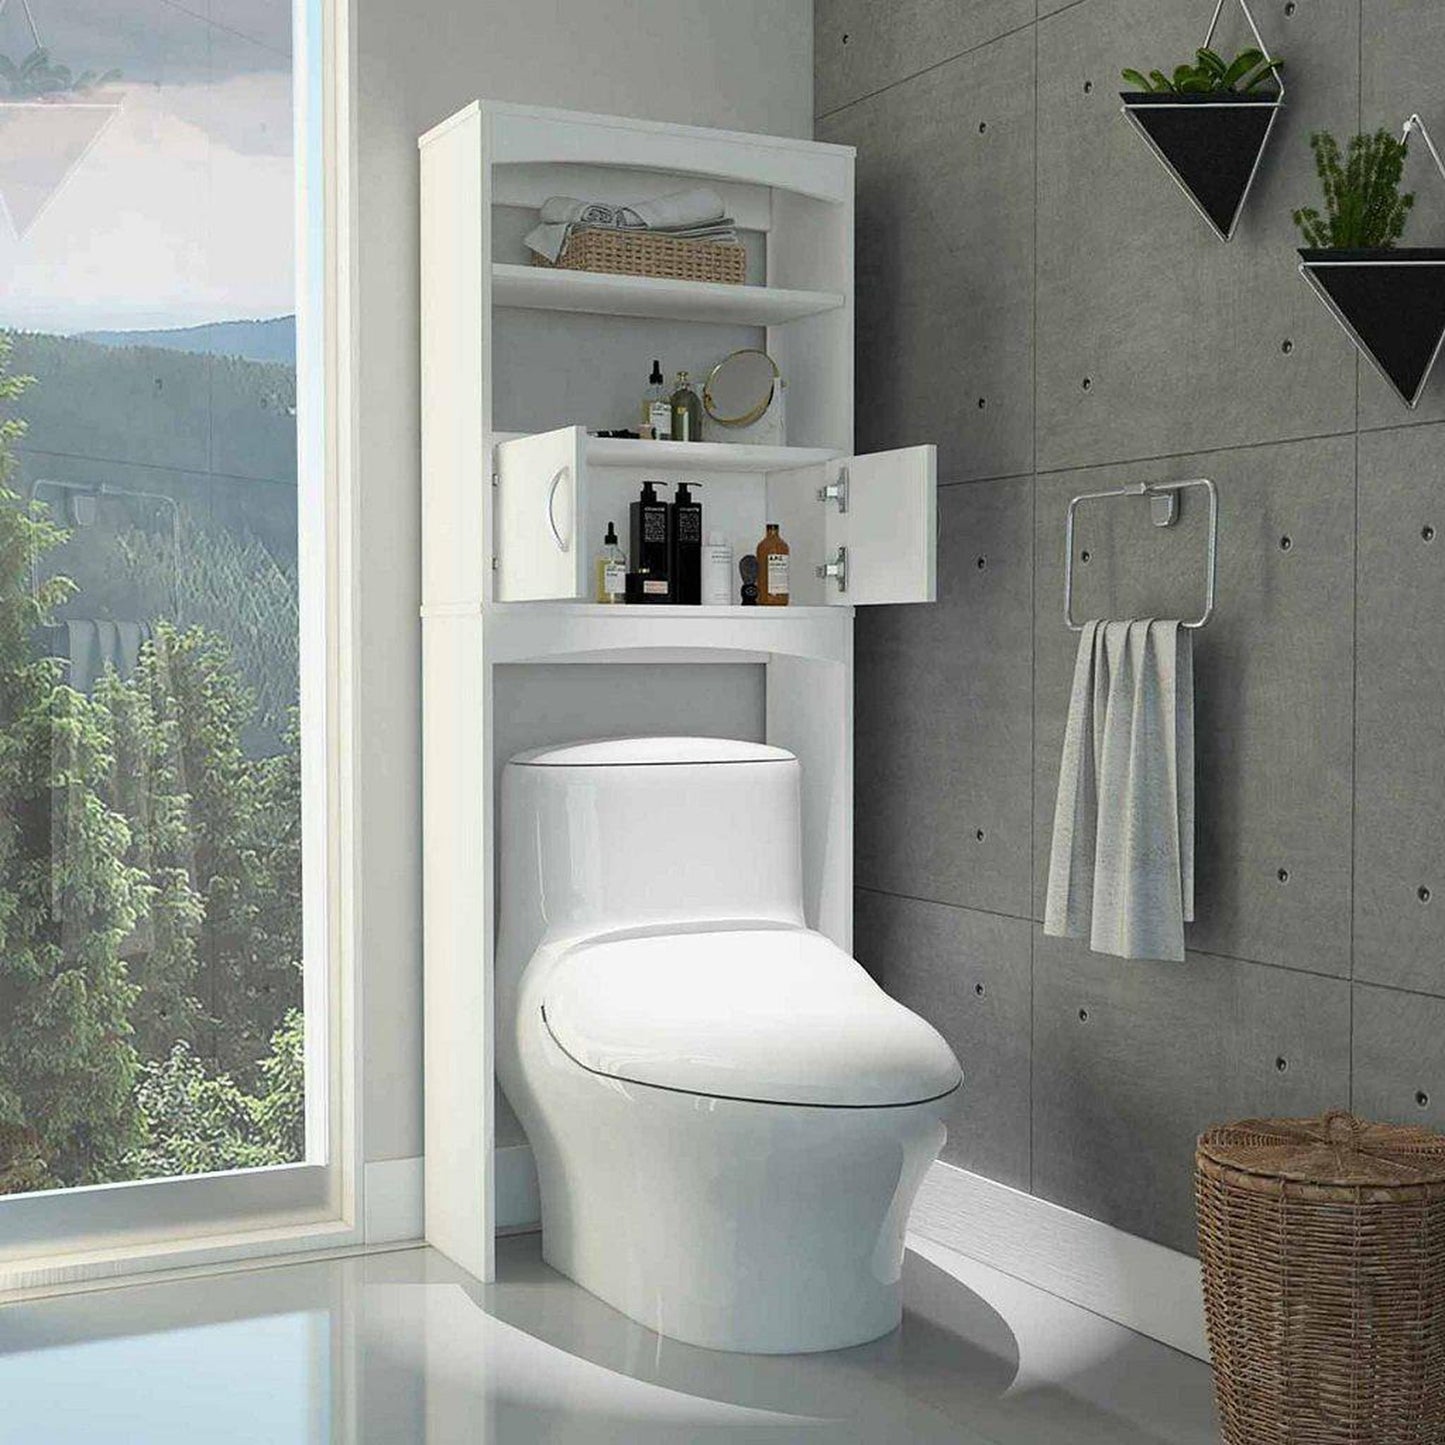 TUHOME Malta 24" x 65" White Freestanding Over-The-Toilet Cabinet With 2 Open Shelves